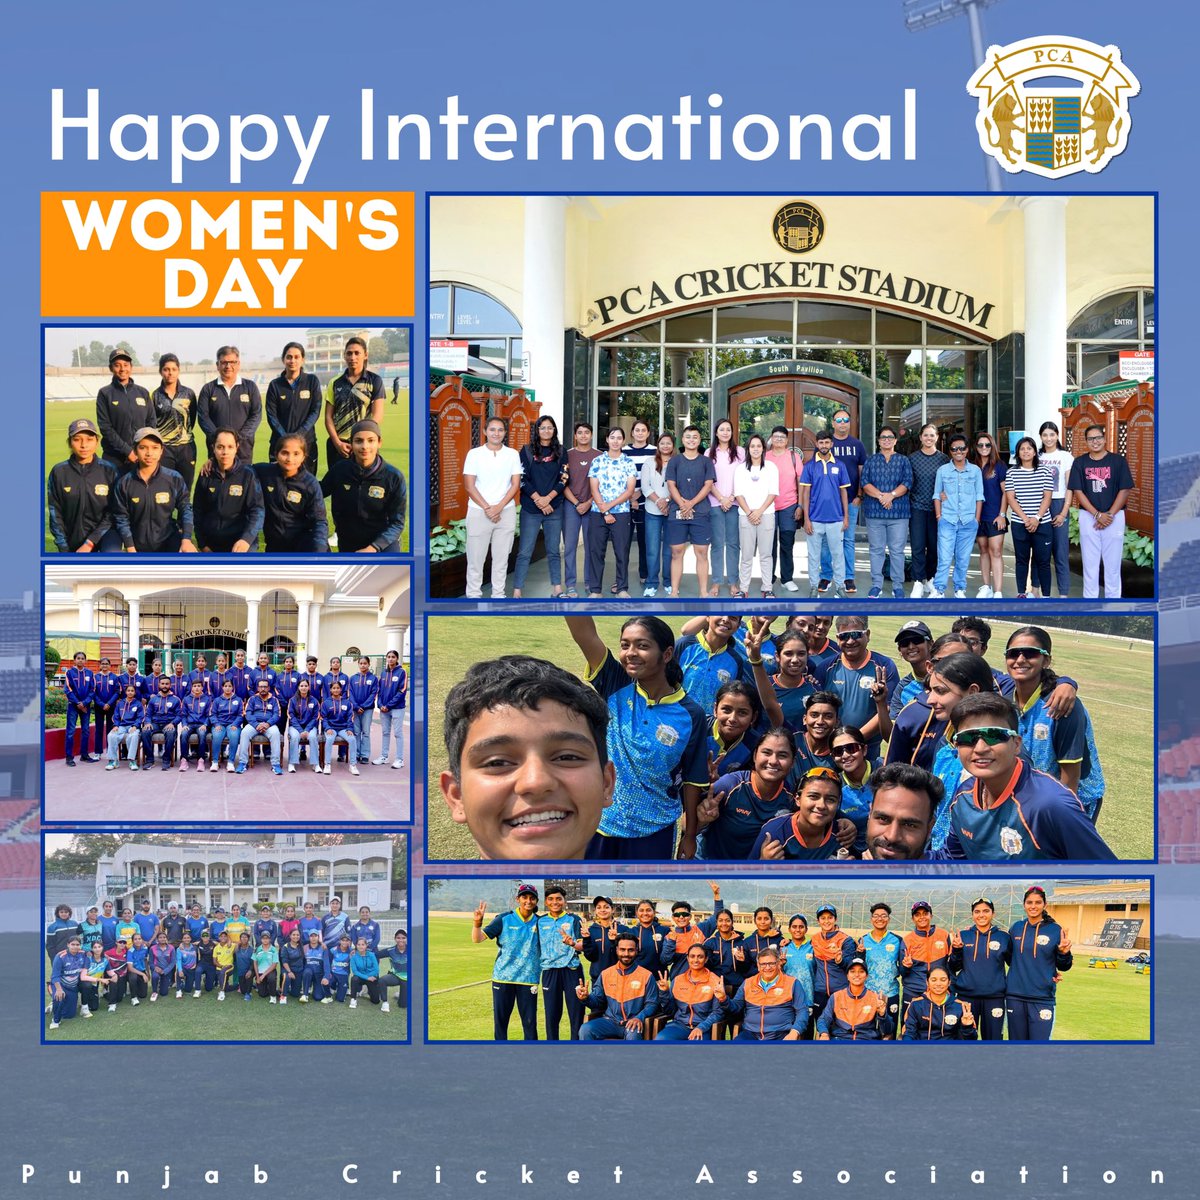 We, the women: On top of their game, PCA wishes its women players a winning season ahead. May success follow you always. Happy Women's Day!